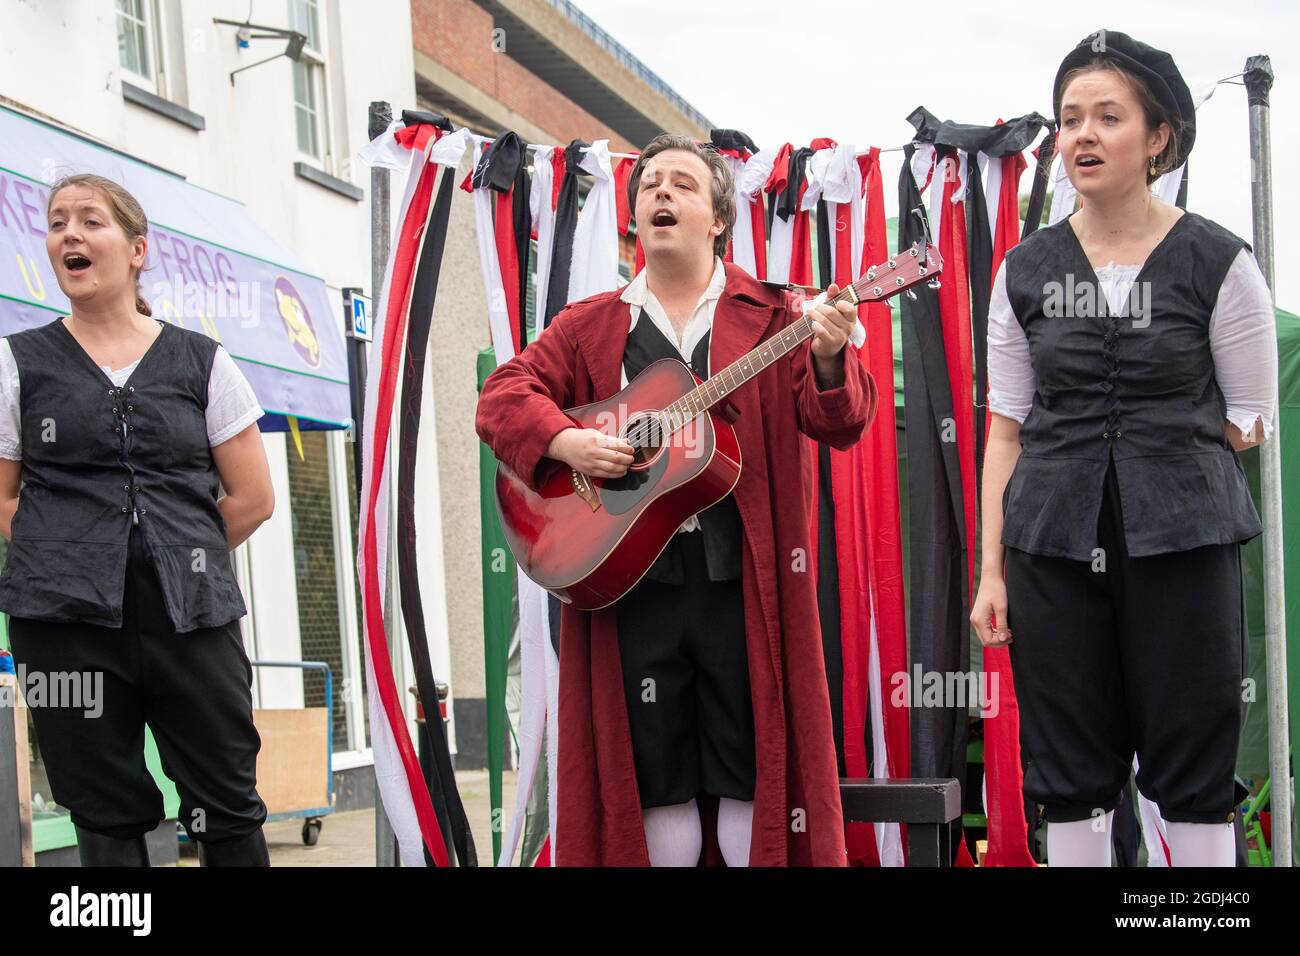 Brentwood, UK. 13th Aug, 2021. Brentwood Essex 13th August 2021 A three actor Brentwood Theatre outside production of Shakespeare's twelfth night as part of the 'Get in to the arts' initiative. Credit: Ian Davidson/Alamy Live News Stock Photo